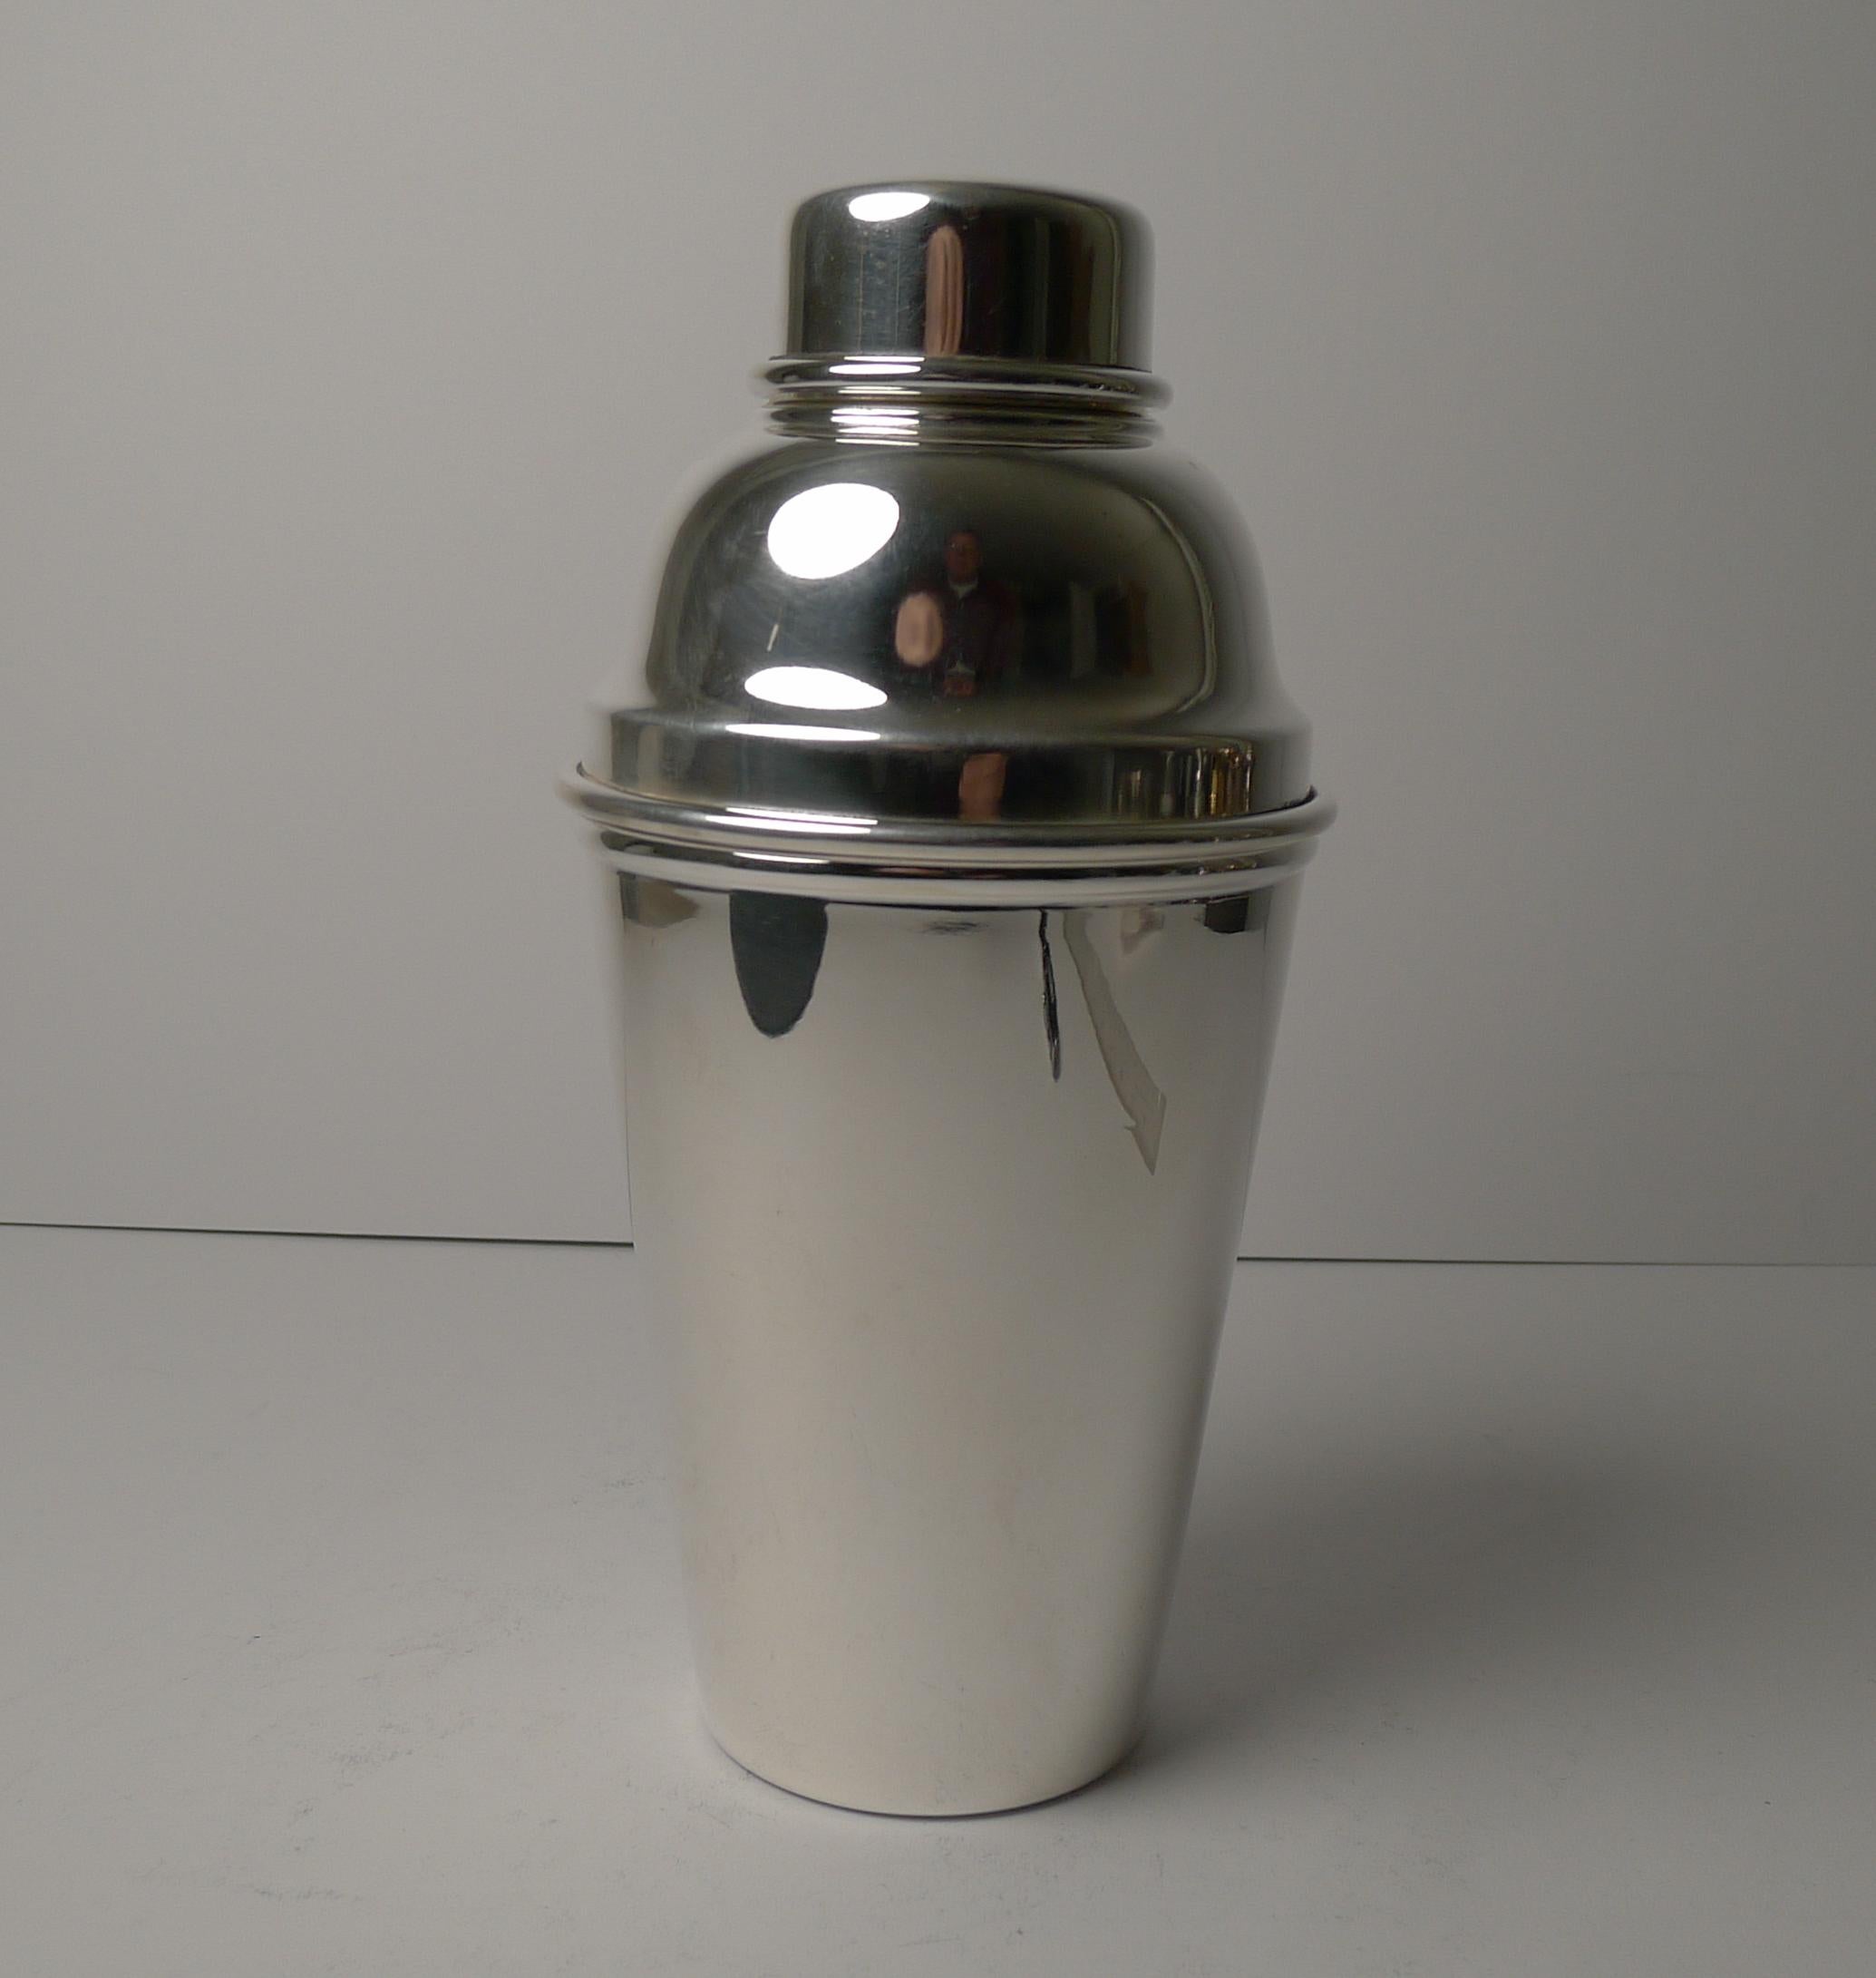 A handsome vintage Art Deco cocktail shaker in silver plate dating to c.1940.

The underside is fully marked for Heckworth for the silversmith's and platers from St Kilda, Victoria in Australia, active from 1940 to 1945.

The interior of the top